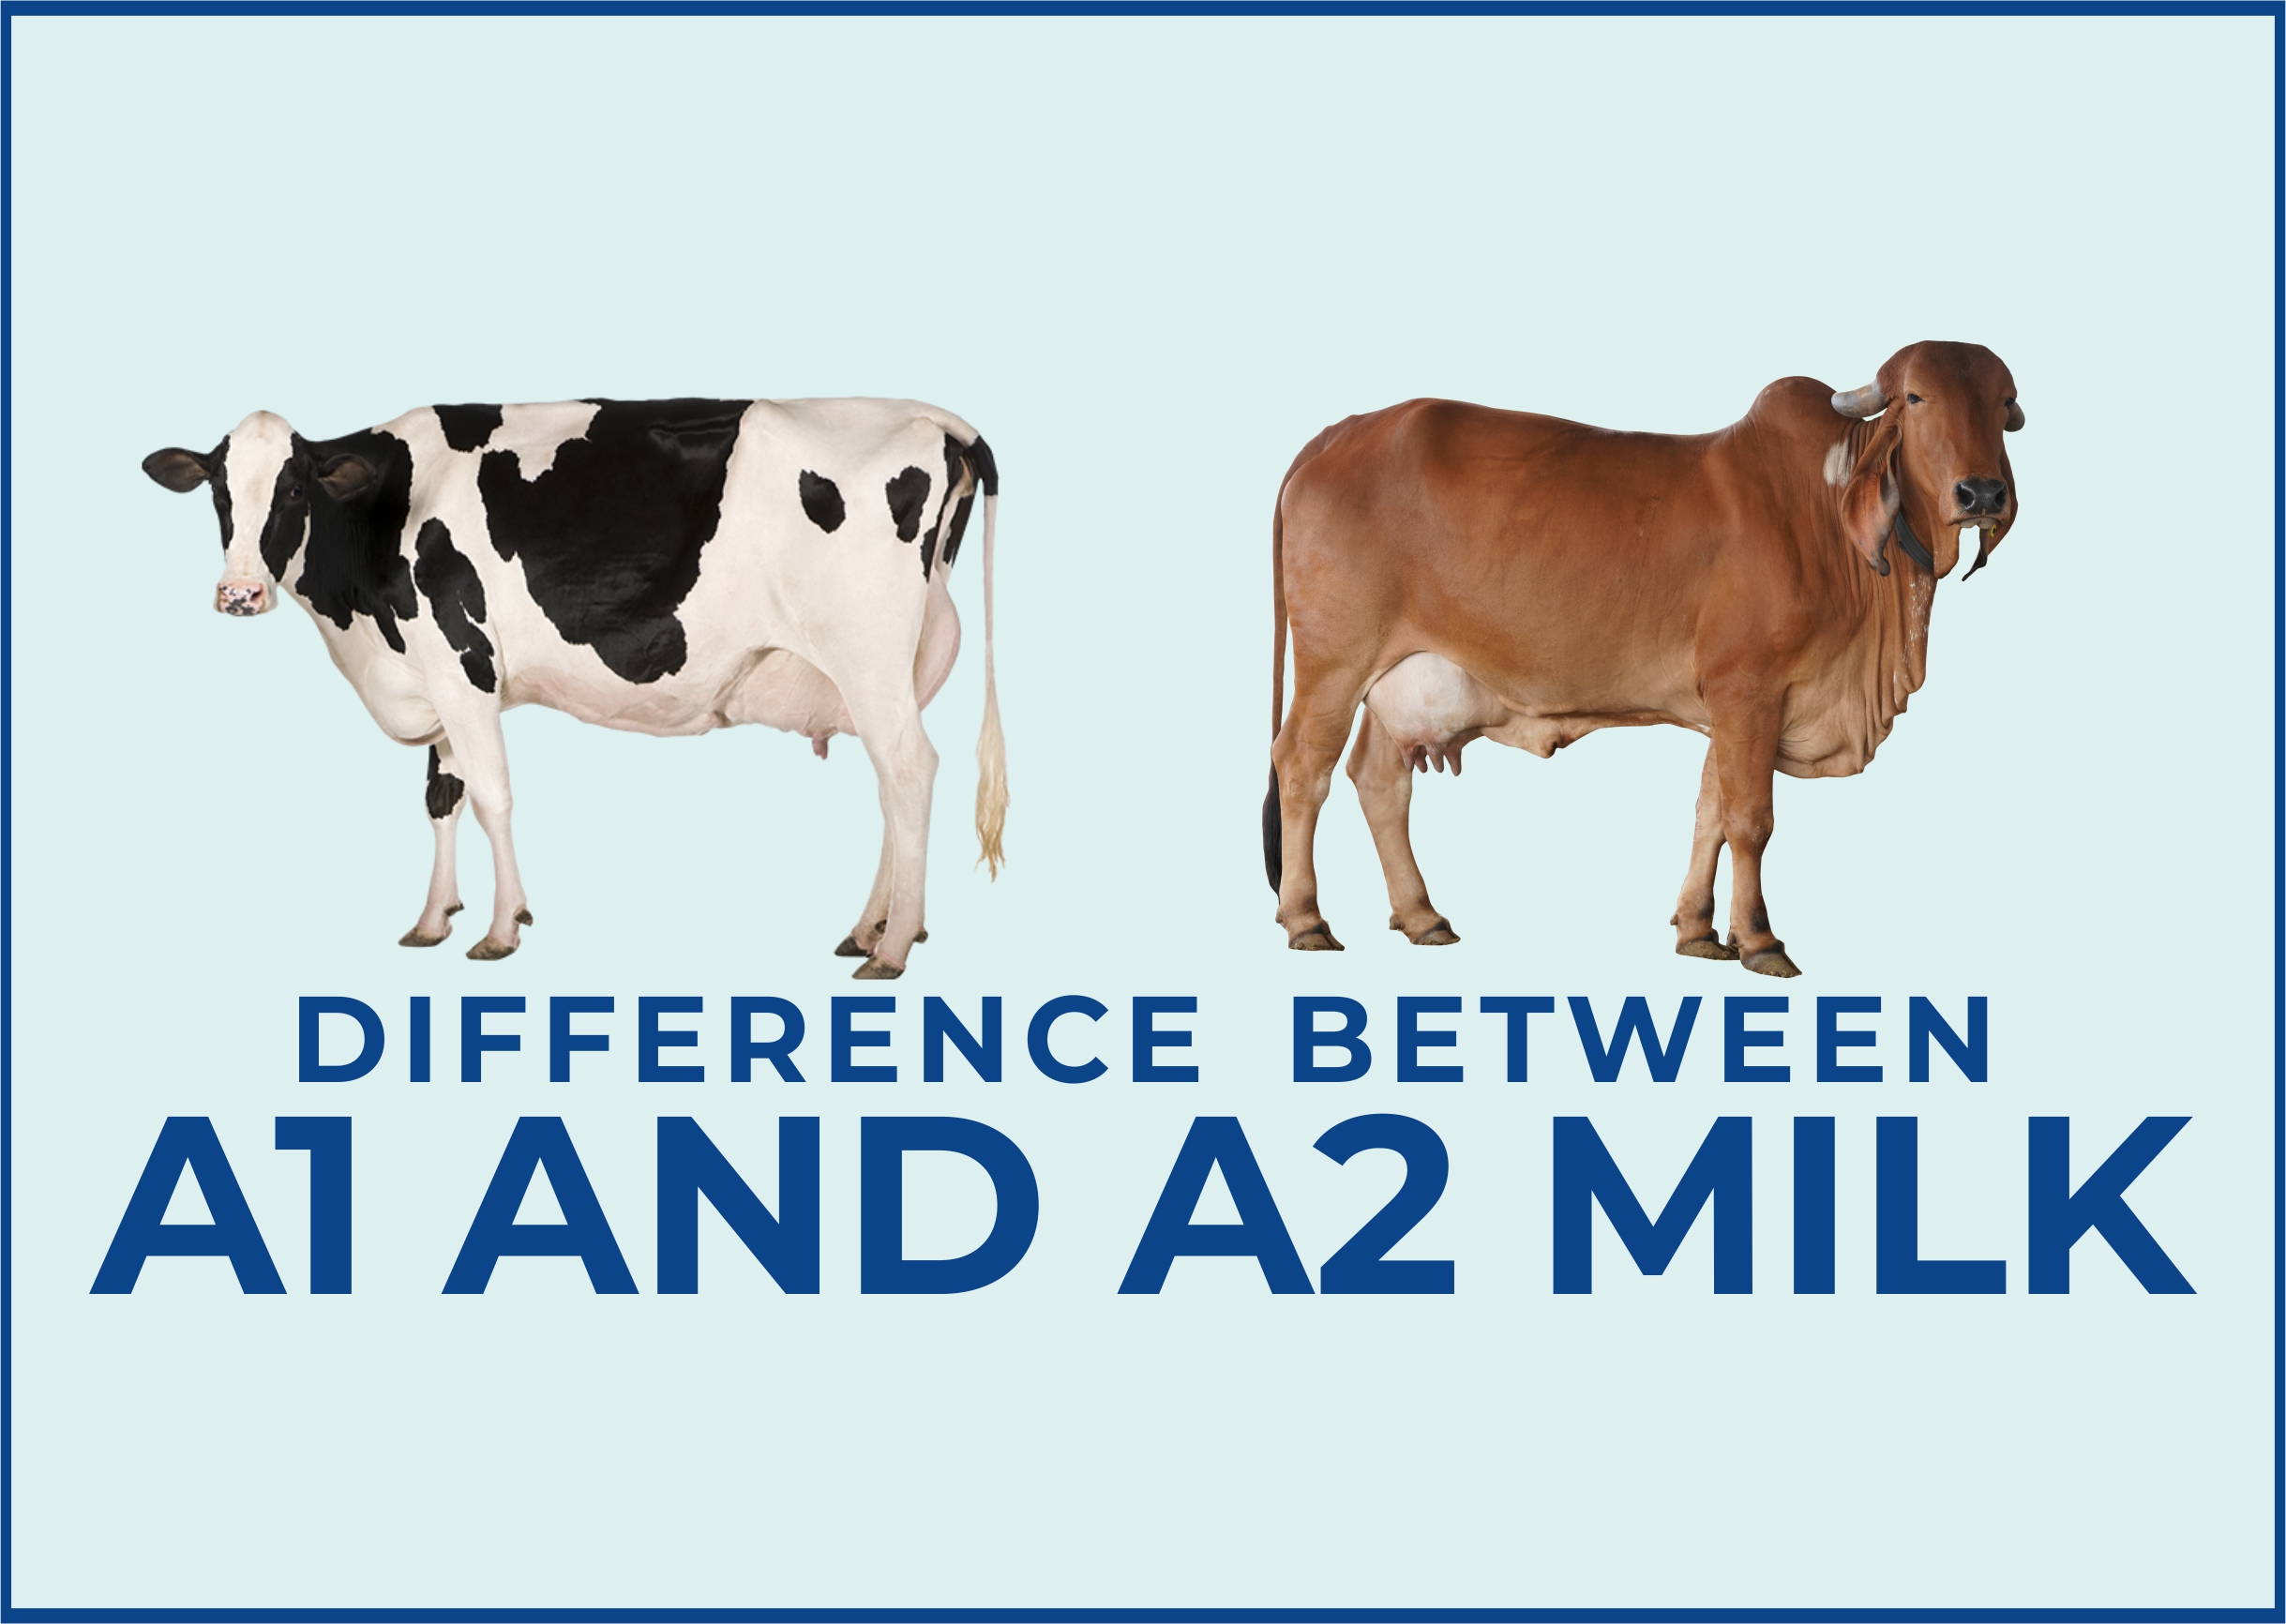 What is the Difference between A1 and A2 Milk?